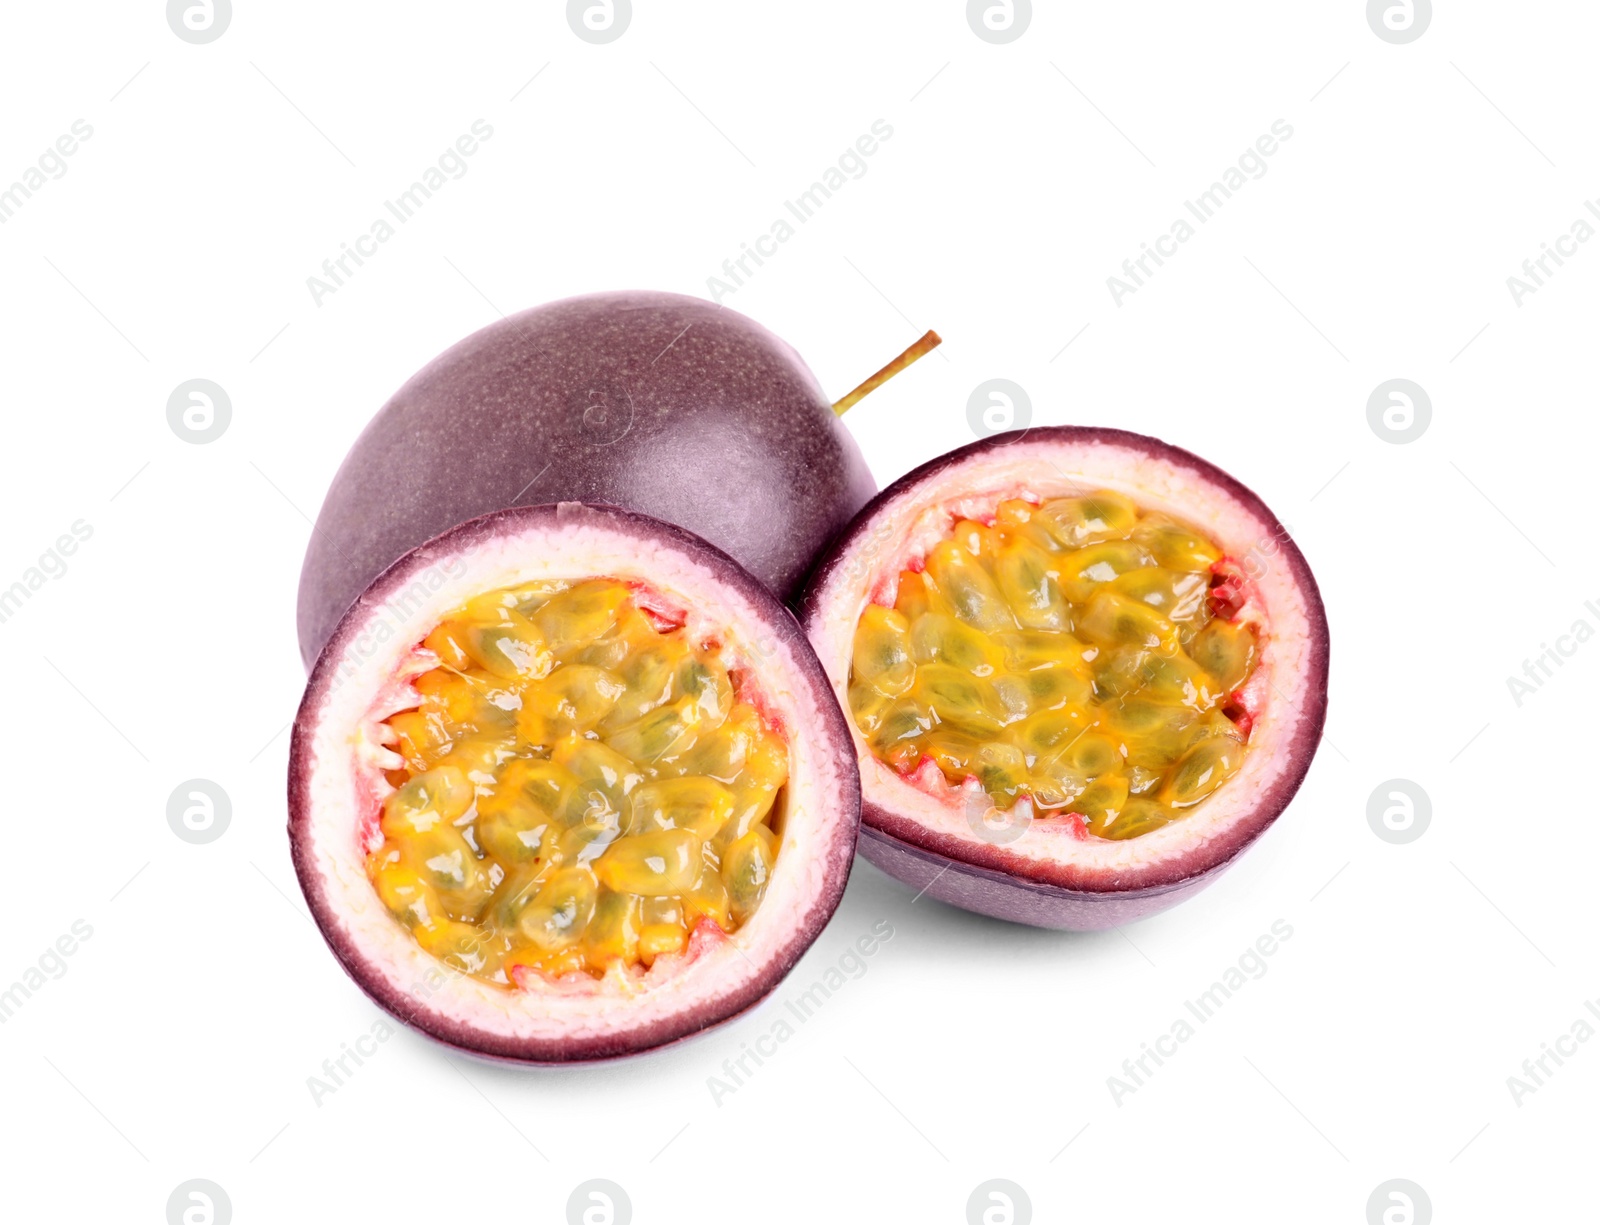 Photo of Cut and whole passion fruits on white background